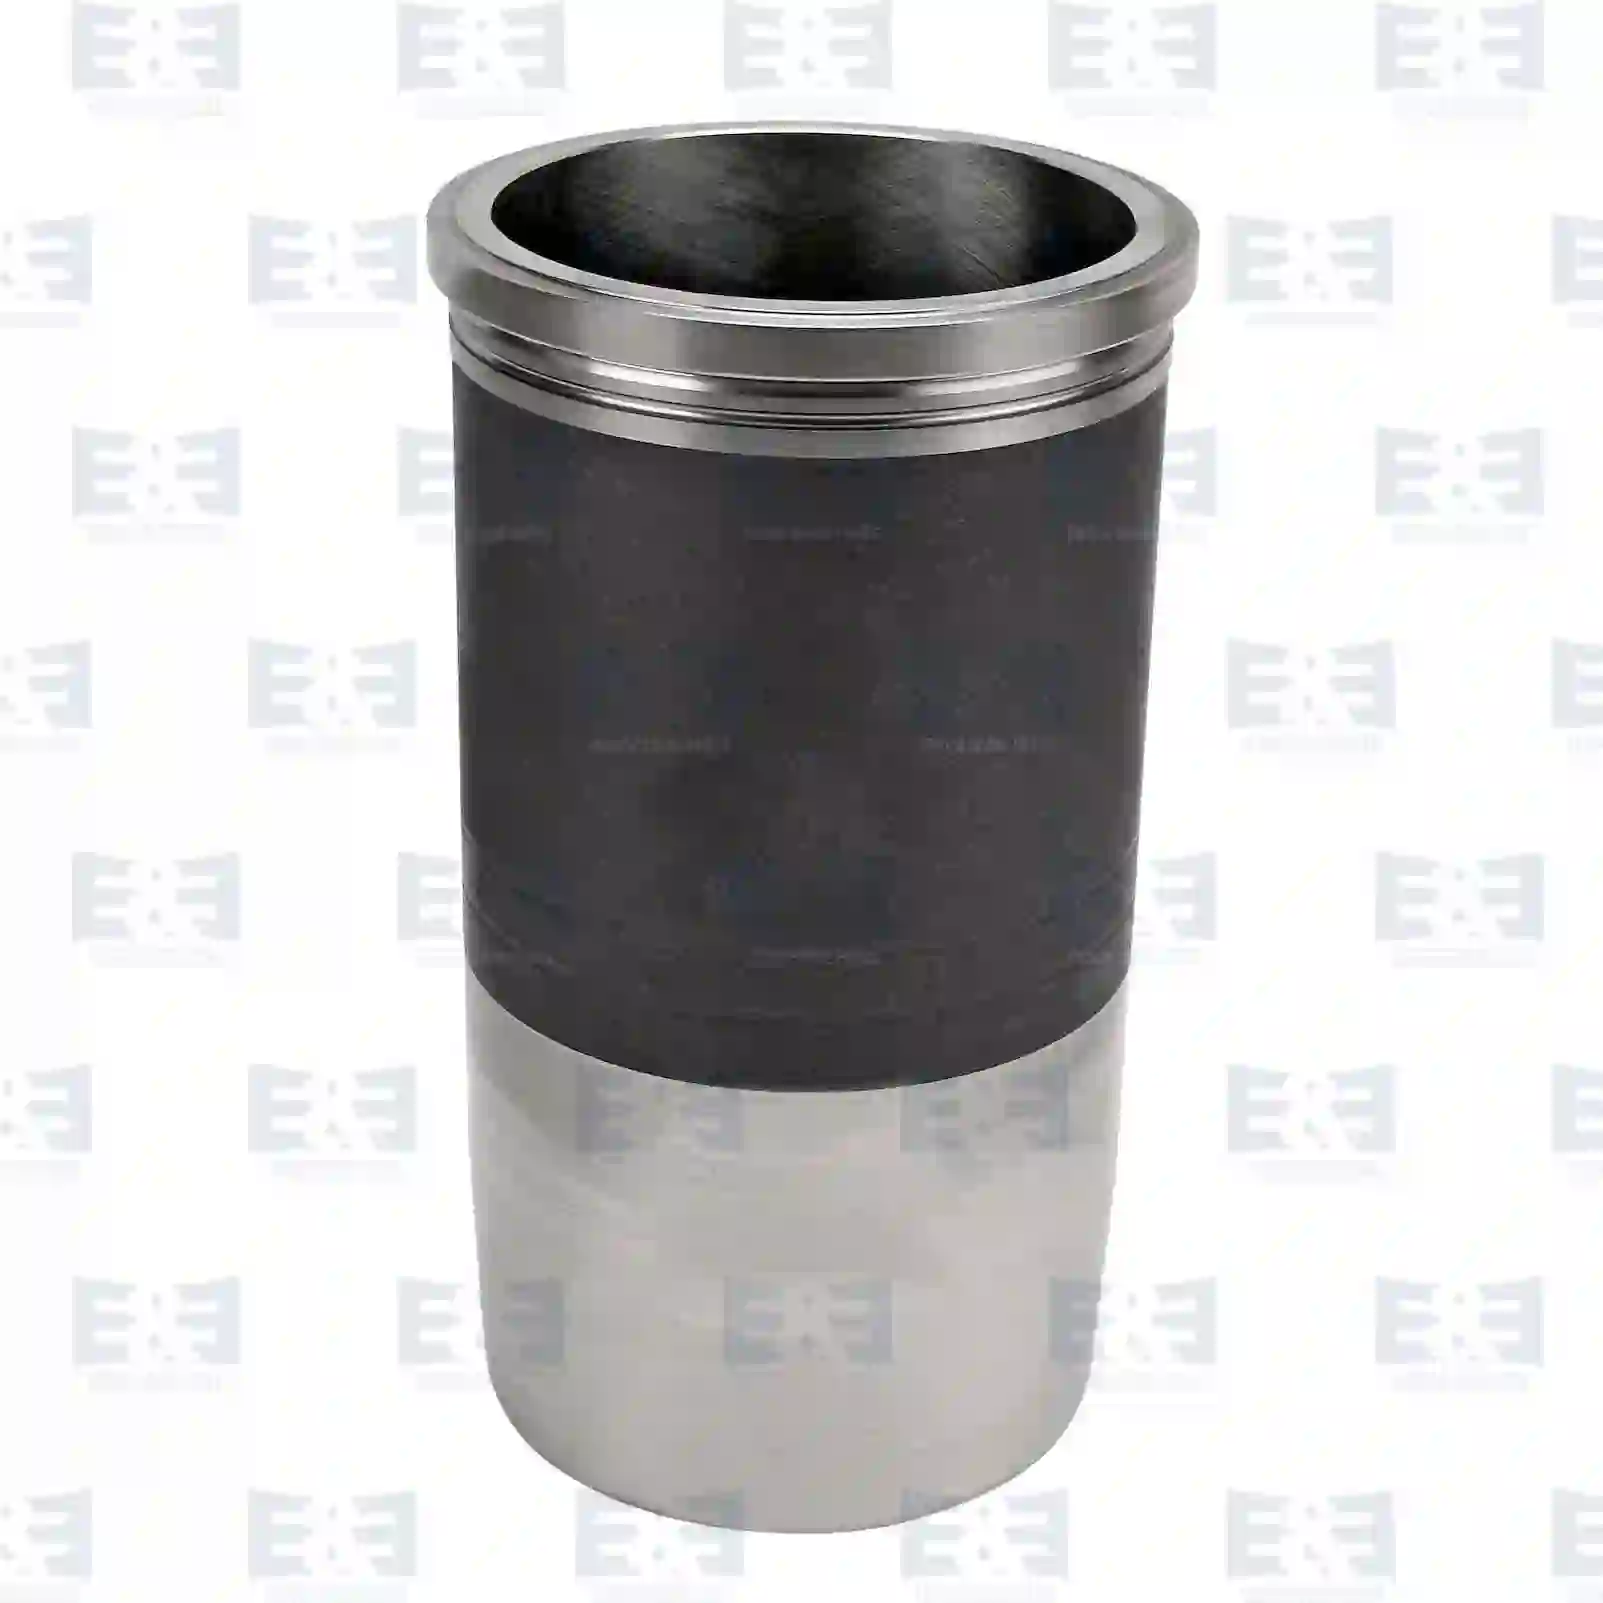 Cylinder liner, without seal rings, 2E2207032, 51012010344 ||  2E2207032 E&E Truck Spare Parts | Truck Spare Parts, Auotomotive Spare Parts Cylinder liner, without seal rings, 2E2207032, 51012010344 ||  2E2207032 E&E Truck Spare Parts | Truck Spare Parts, Auotomotive Spare Parts